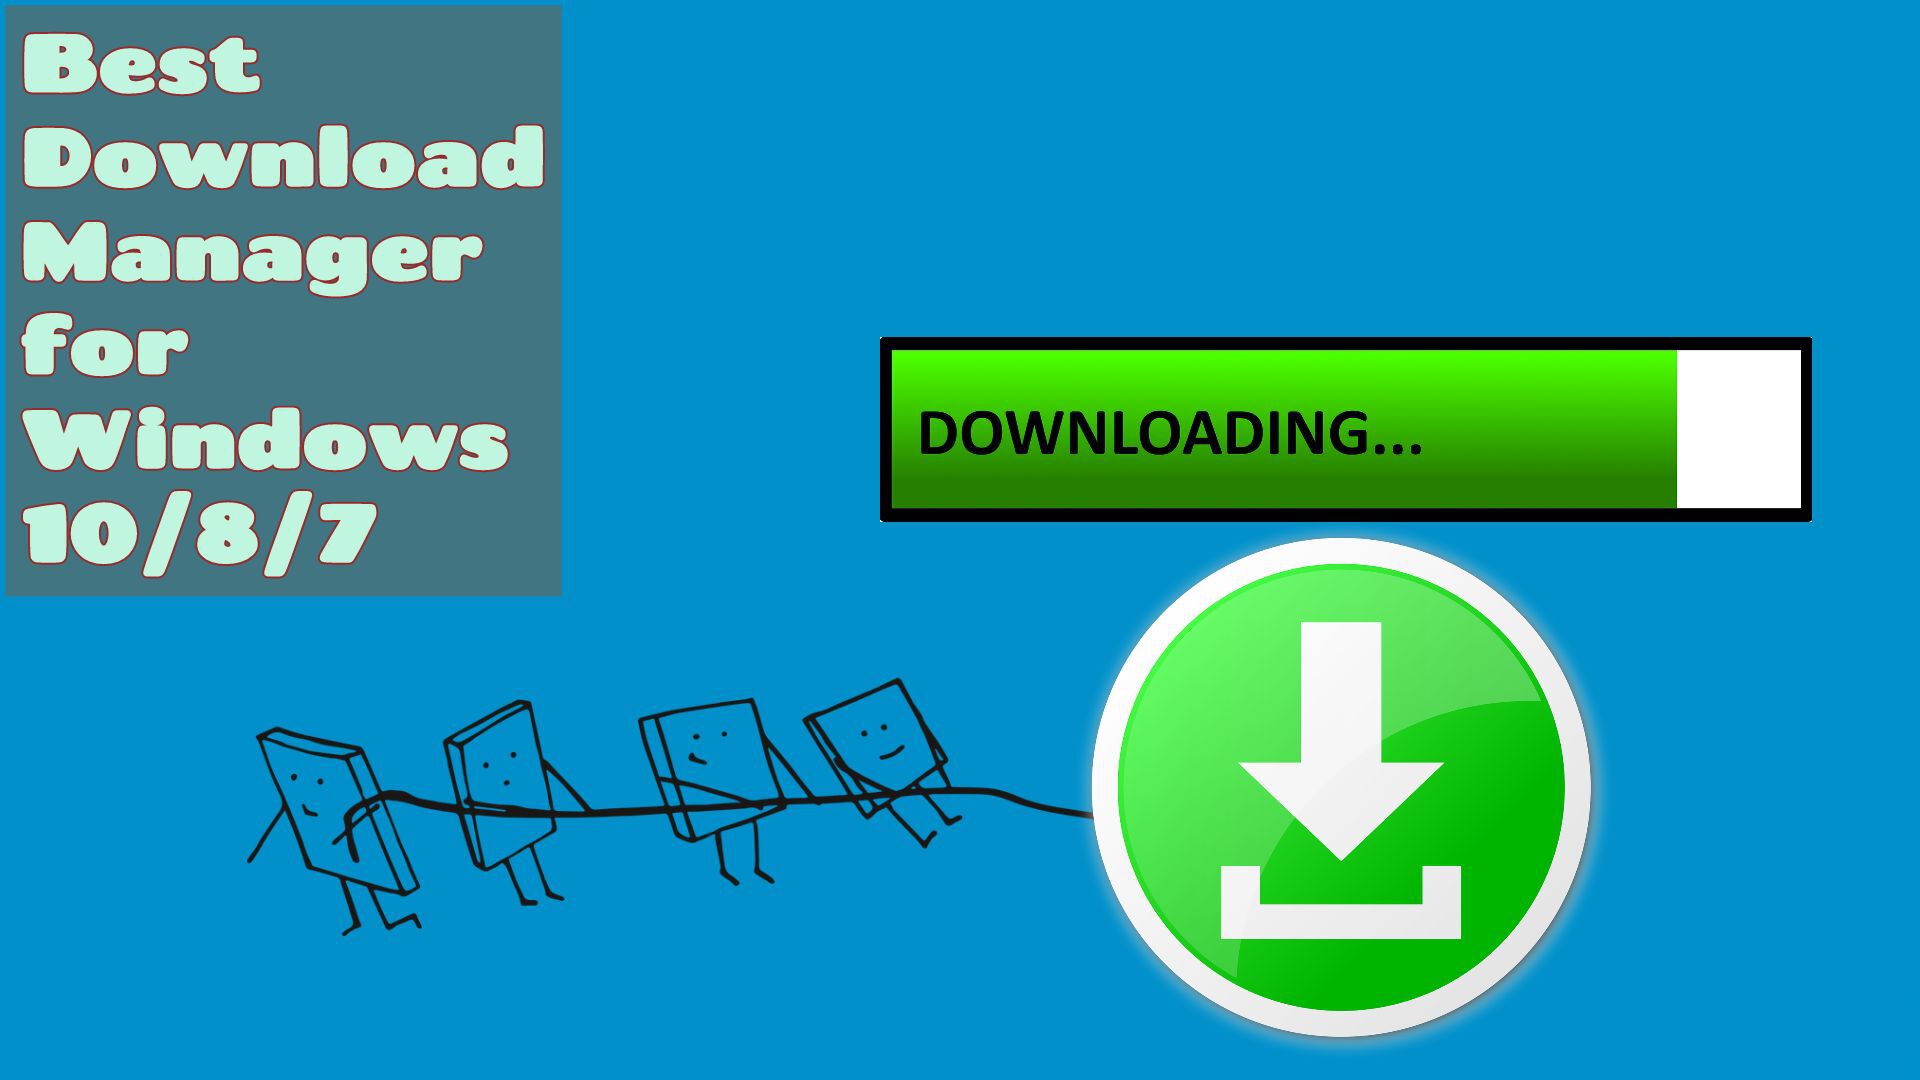 internet download manager free direct download